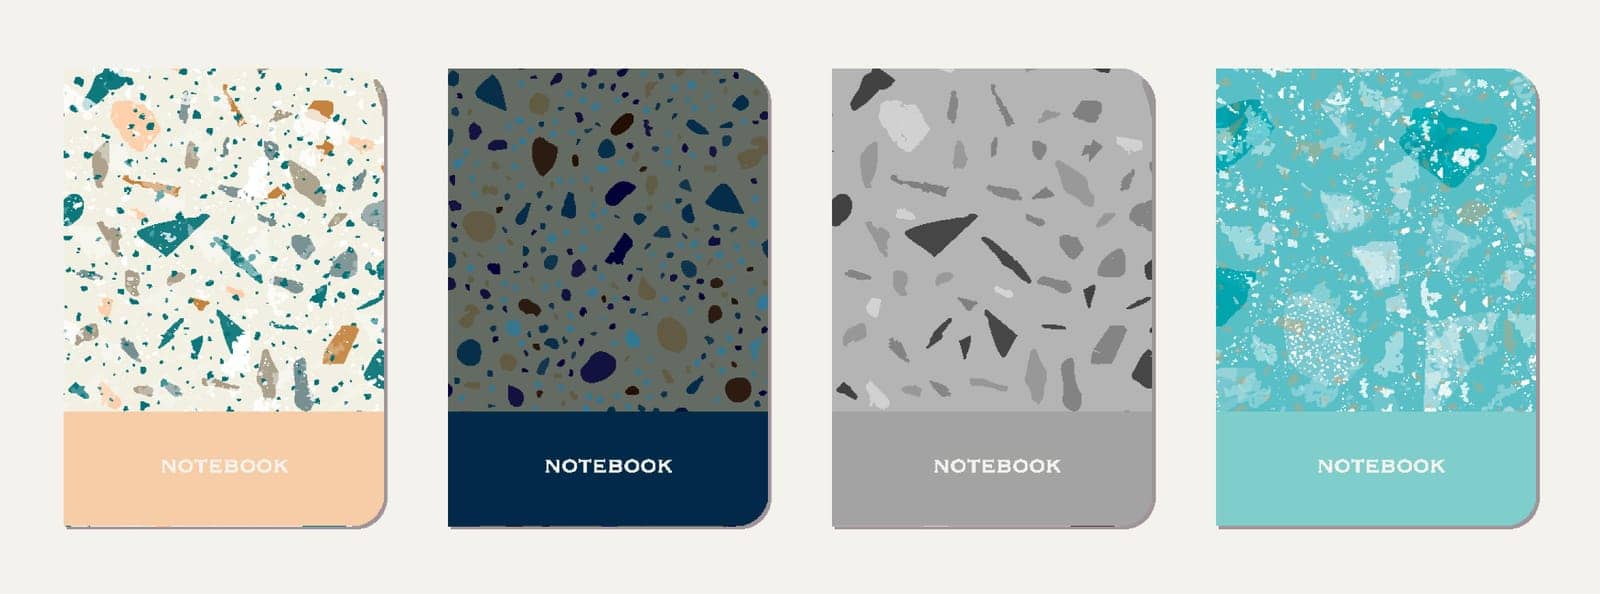 Notepad cover design. Terrazzo abstract by beginagain